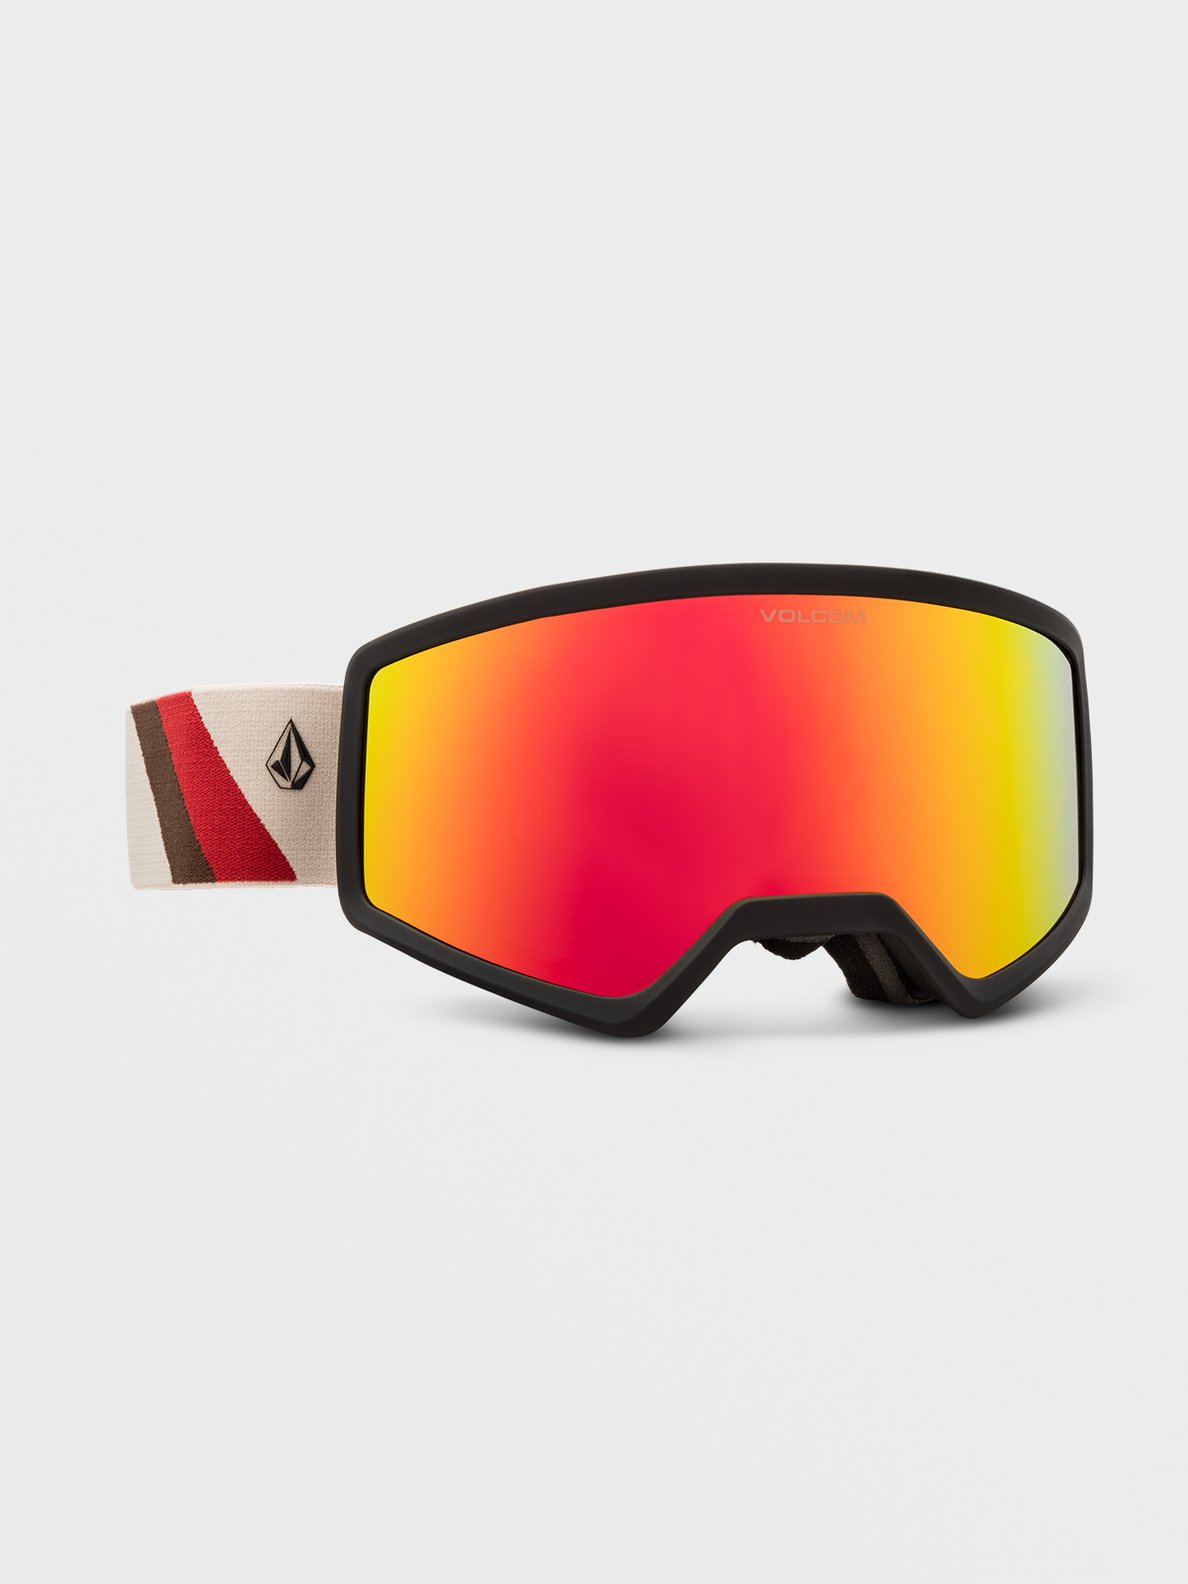 STONEY GOGGLE RED EARTH - RED CHROME